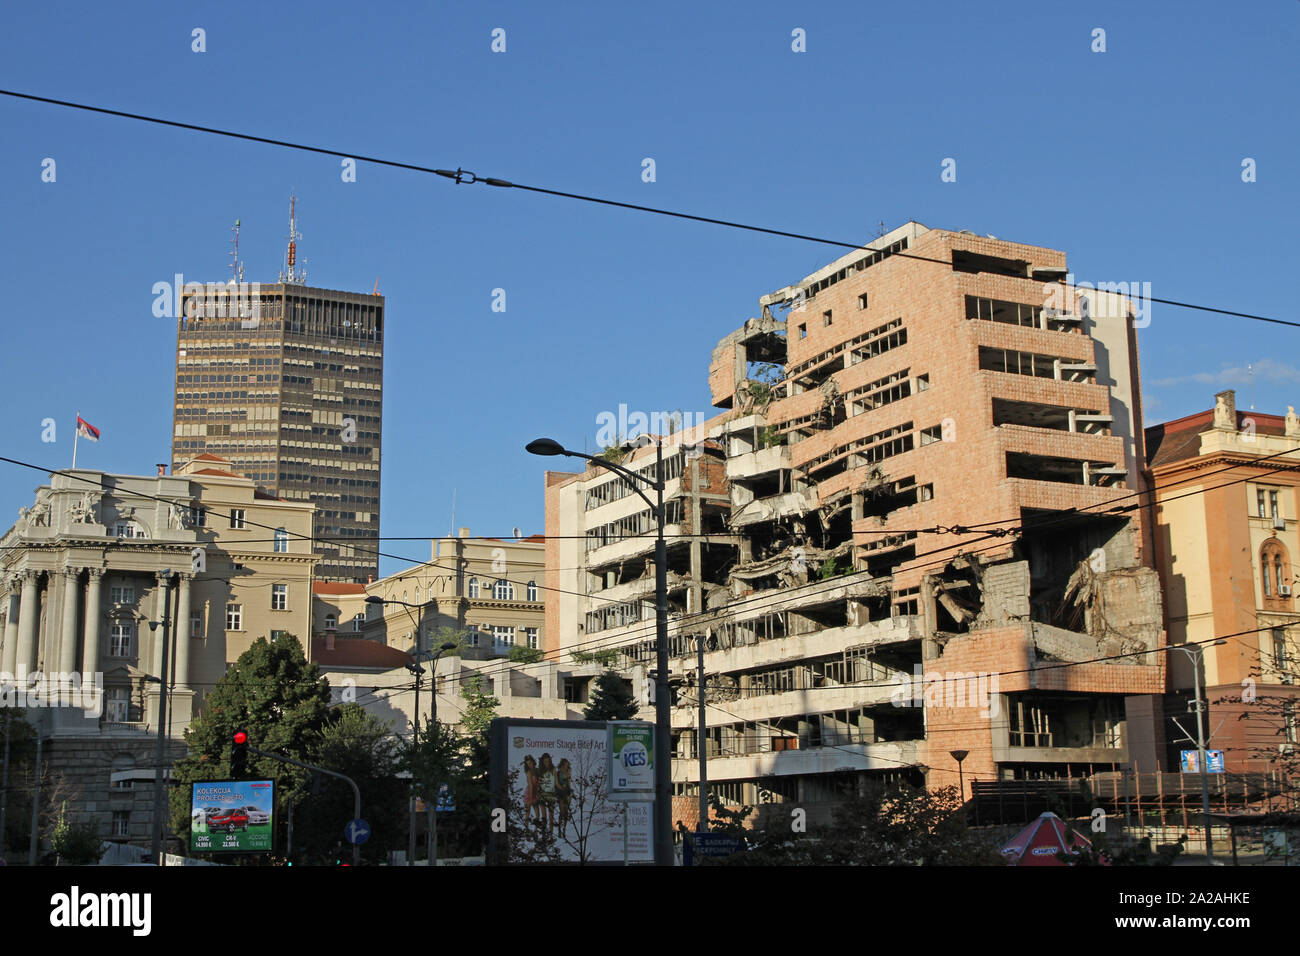 Remains of The Former Yugoslav Ministry of Defence and the Former Yugoslav Ministry of Defense with the Belgrade Palace skyskraper in the background, Belgrade Central, Serbia. Stock Photo